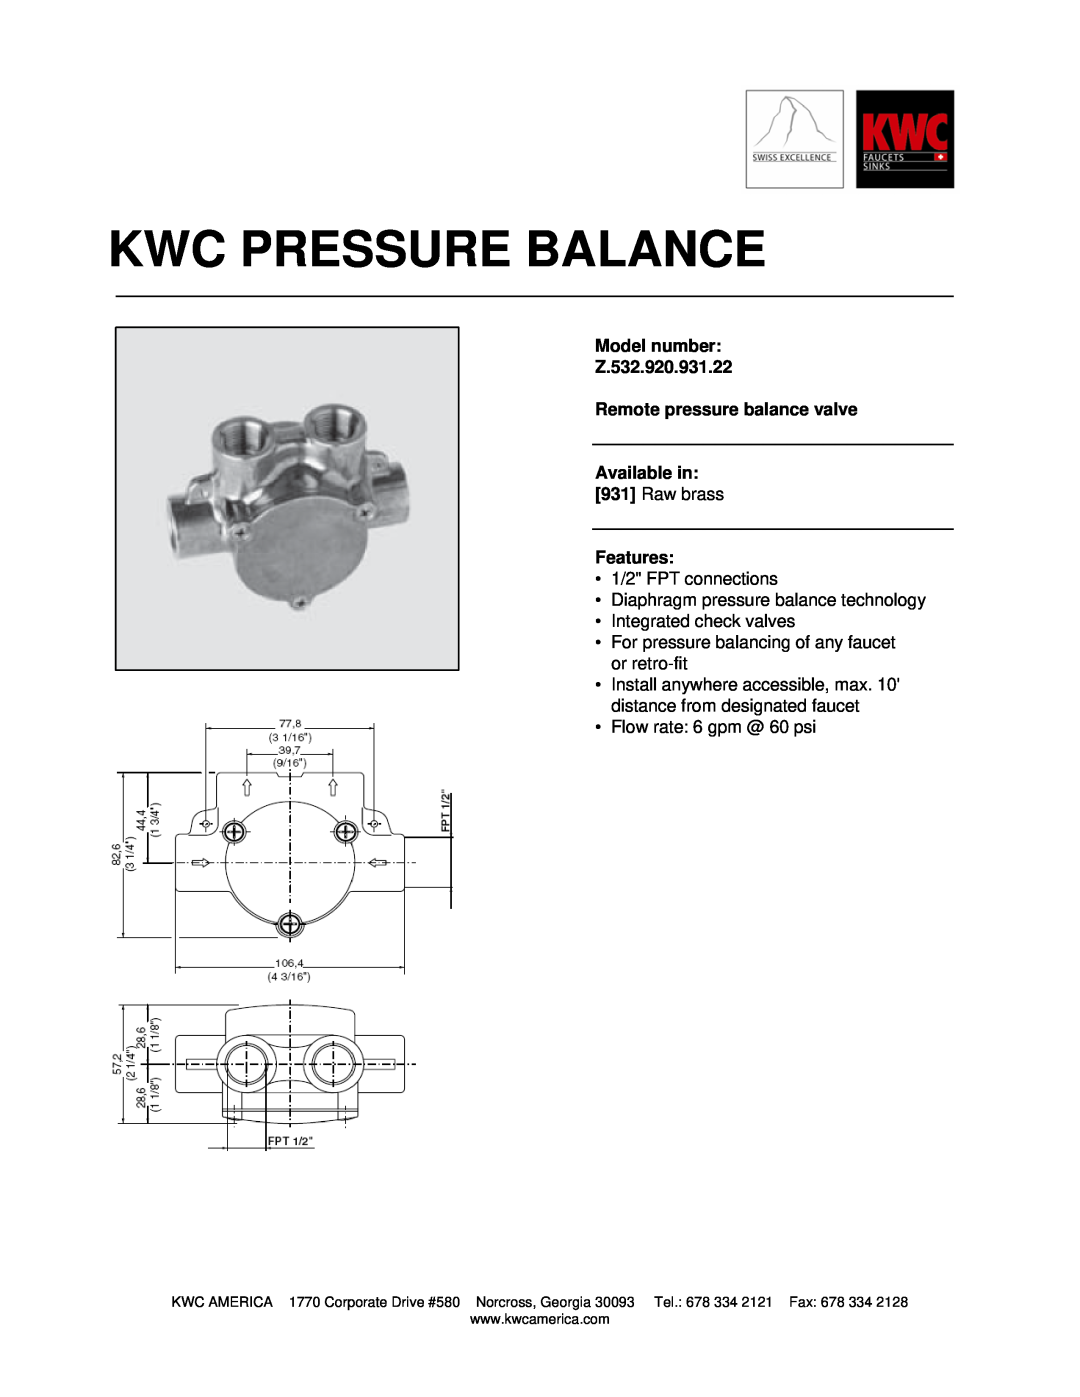 KWC manual Kwc Pressure Balance, Model number Z.532.920.931.22, Remote pressure balance valve Available in, Features 